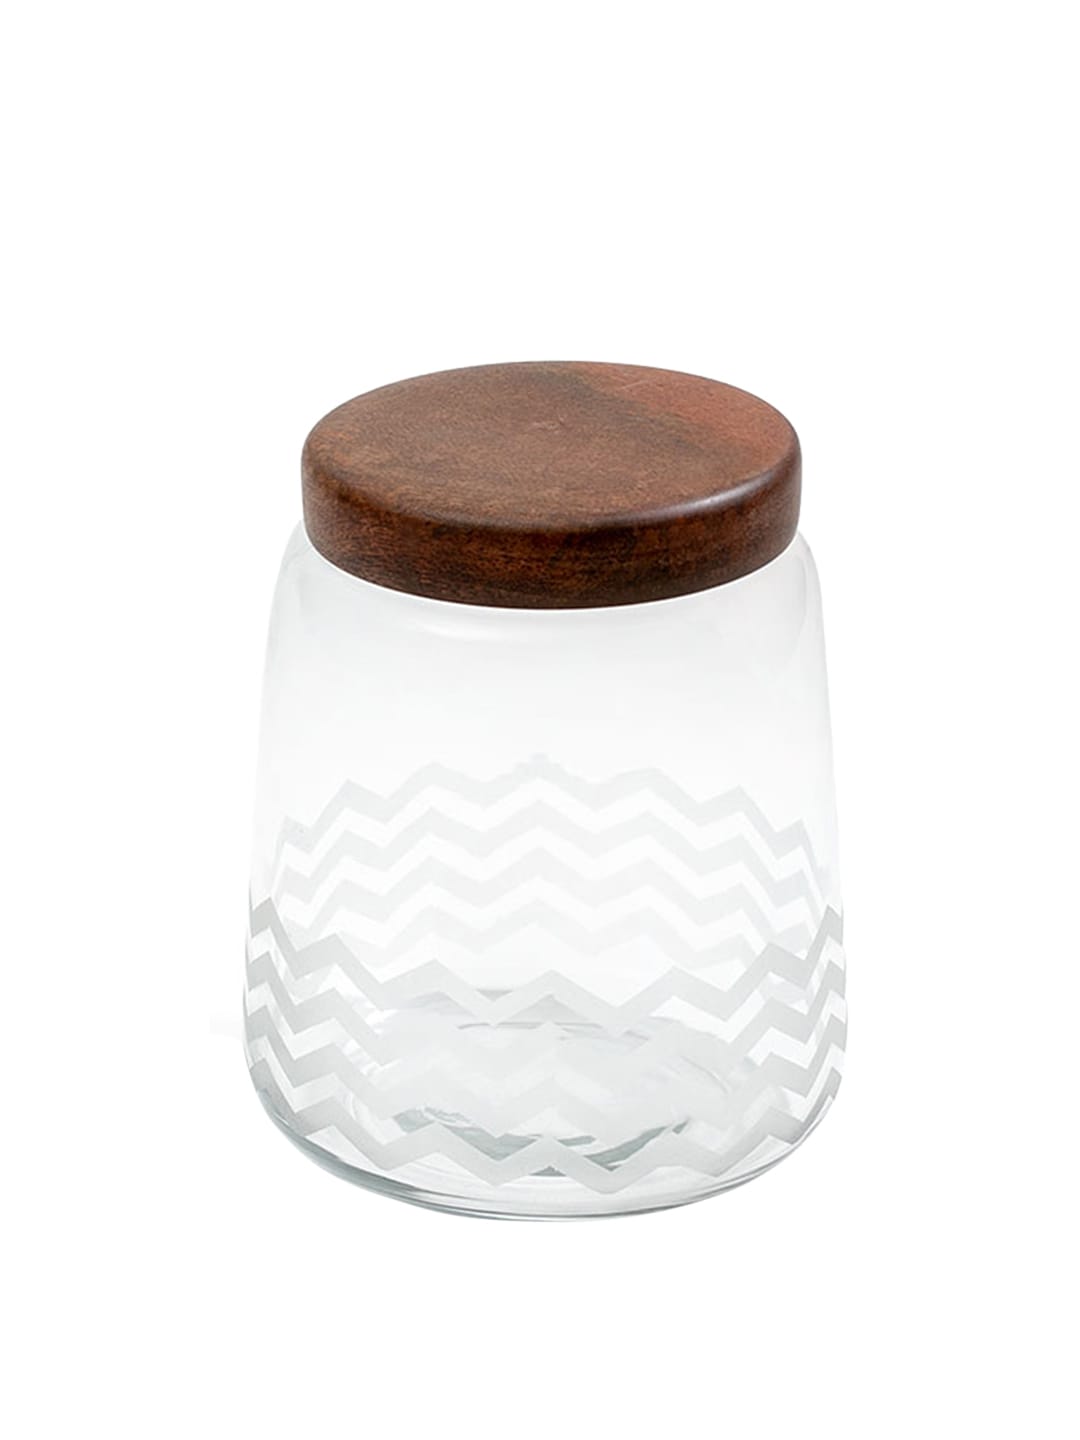 ellementry Transparent & Brown Solid Glass Cookie Jar With Mango Wood Lid Price in India